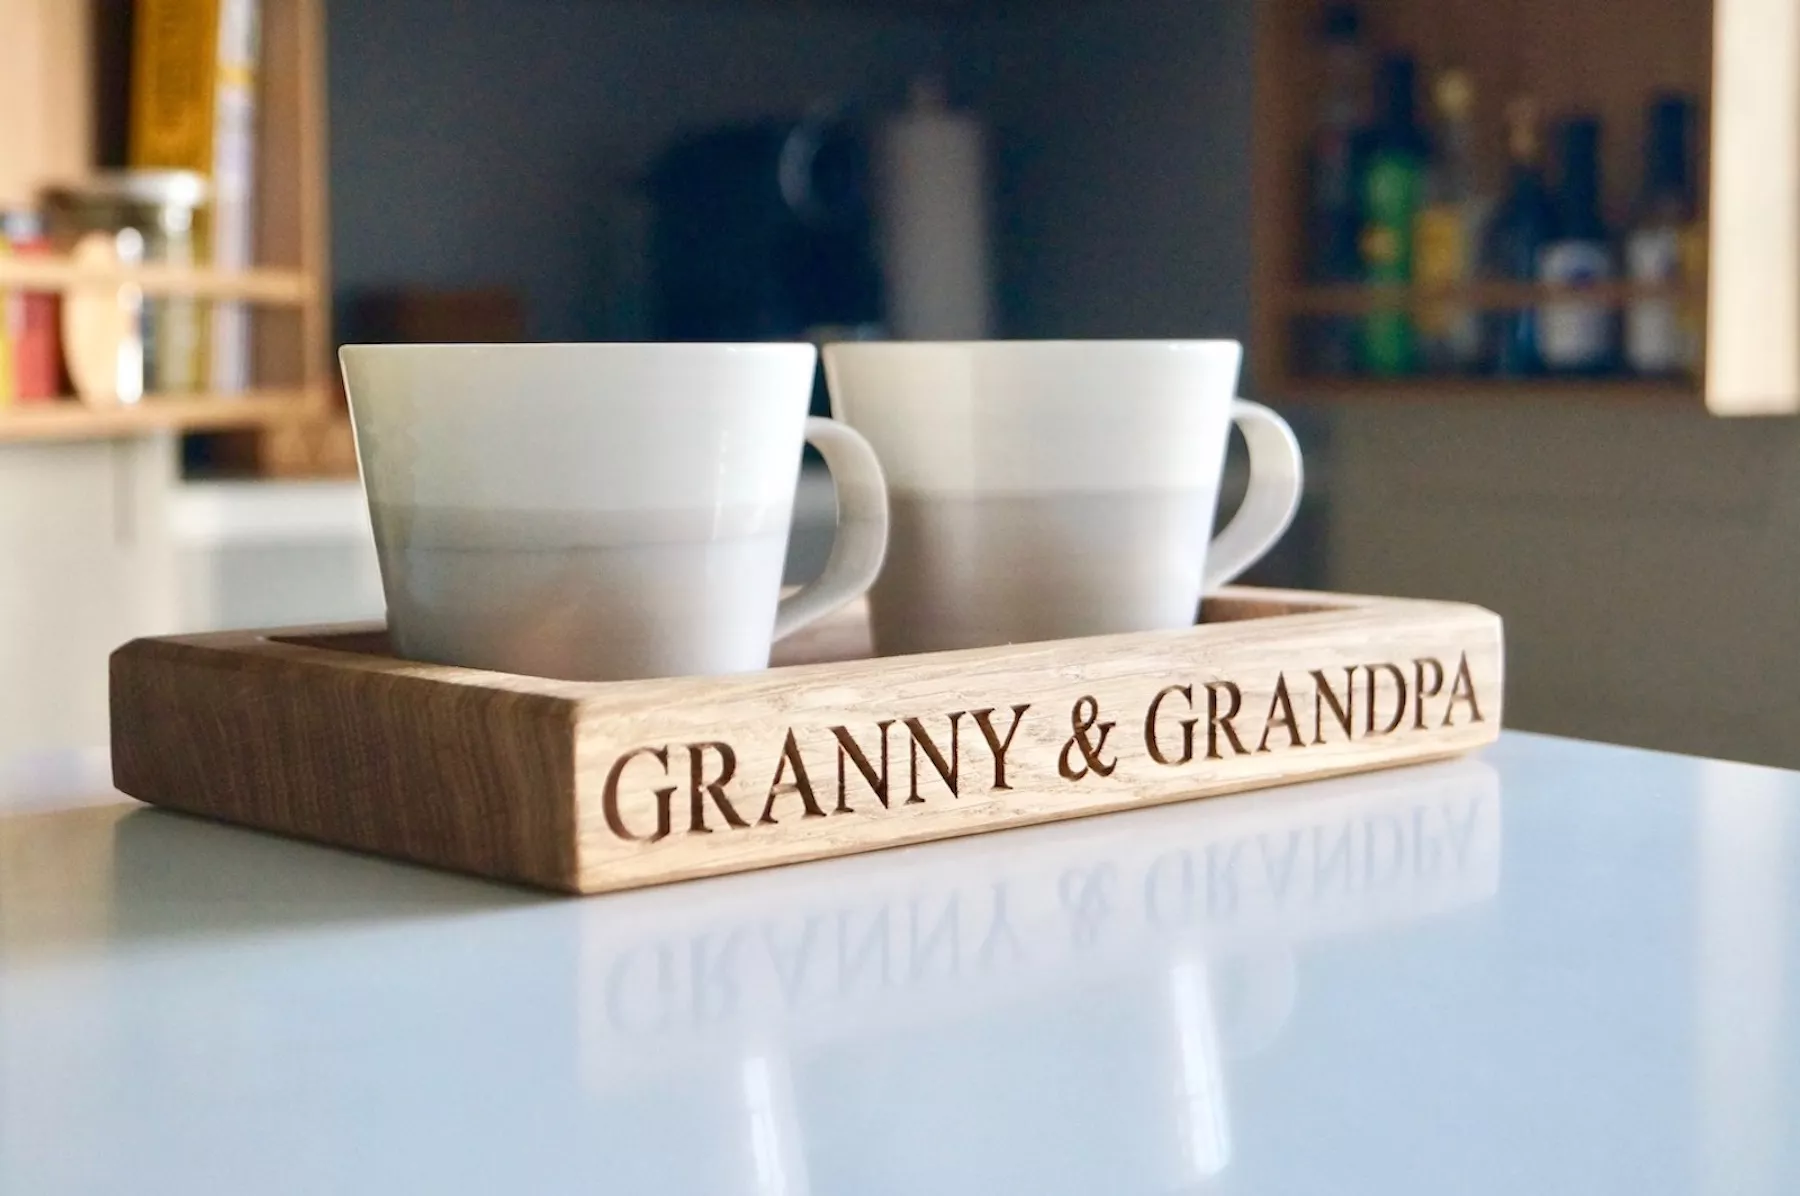 Tea Tray Grandad's Tea and Cake Goes Here Campers Rectangle Tea/coffee Tray Board Family Gift 